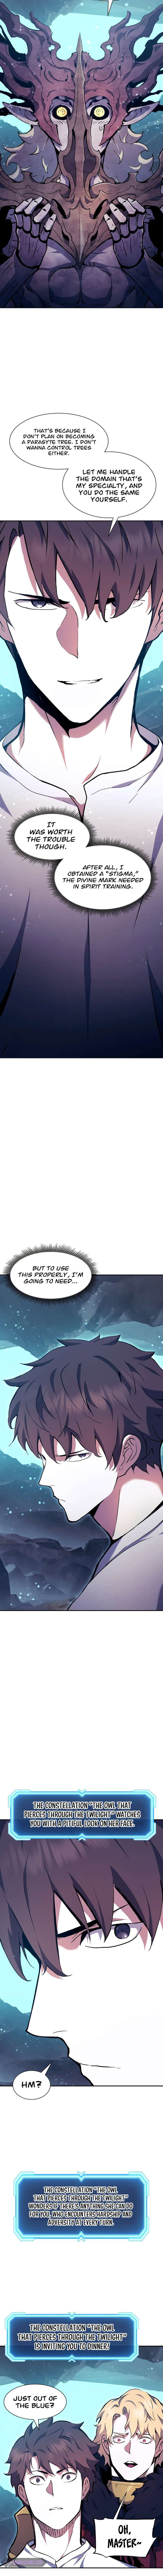 Return Of The Shattered Constellation Chapter 93 page 6